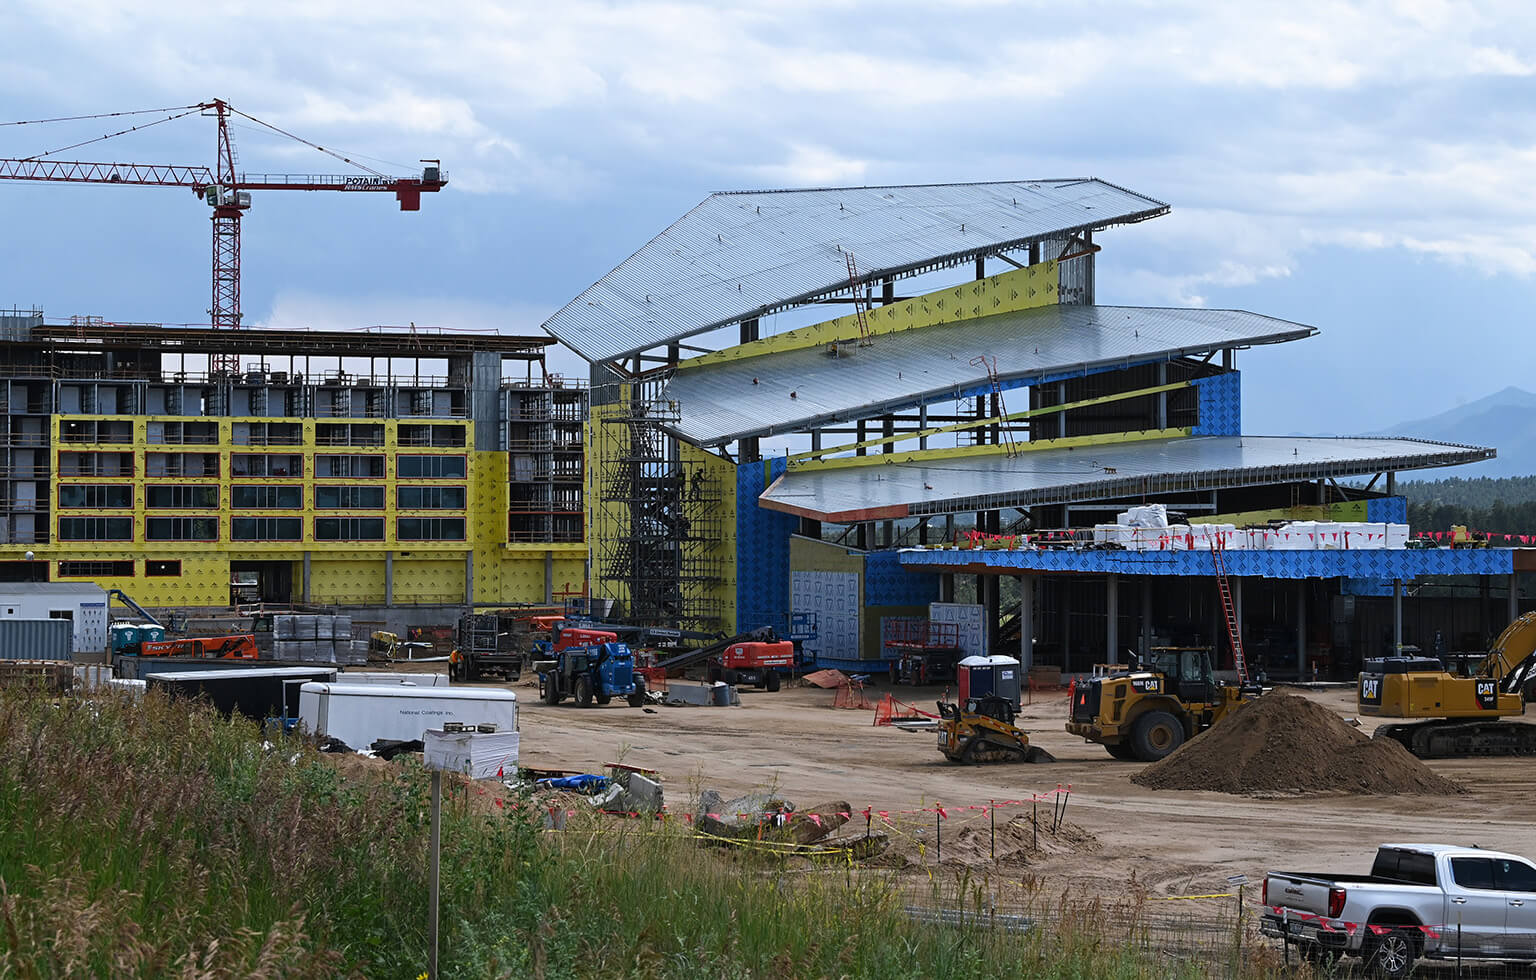 new visitor center and hotel under construction